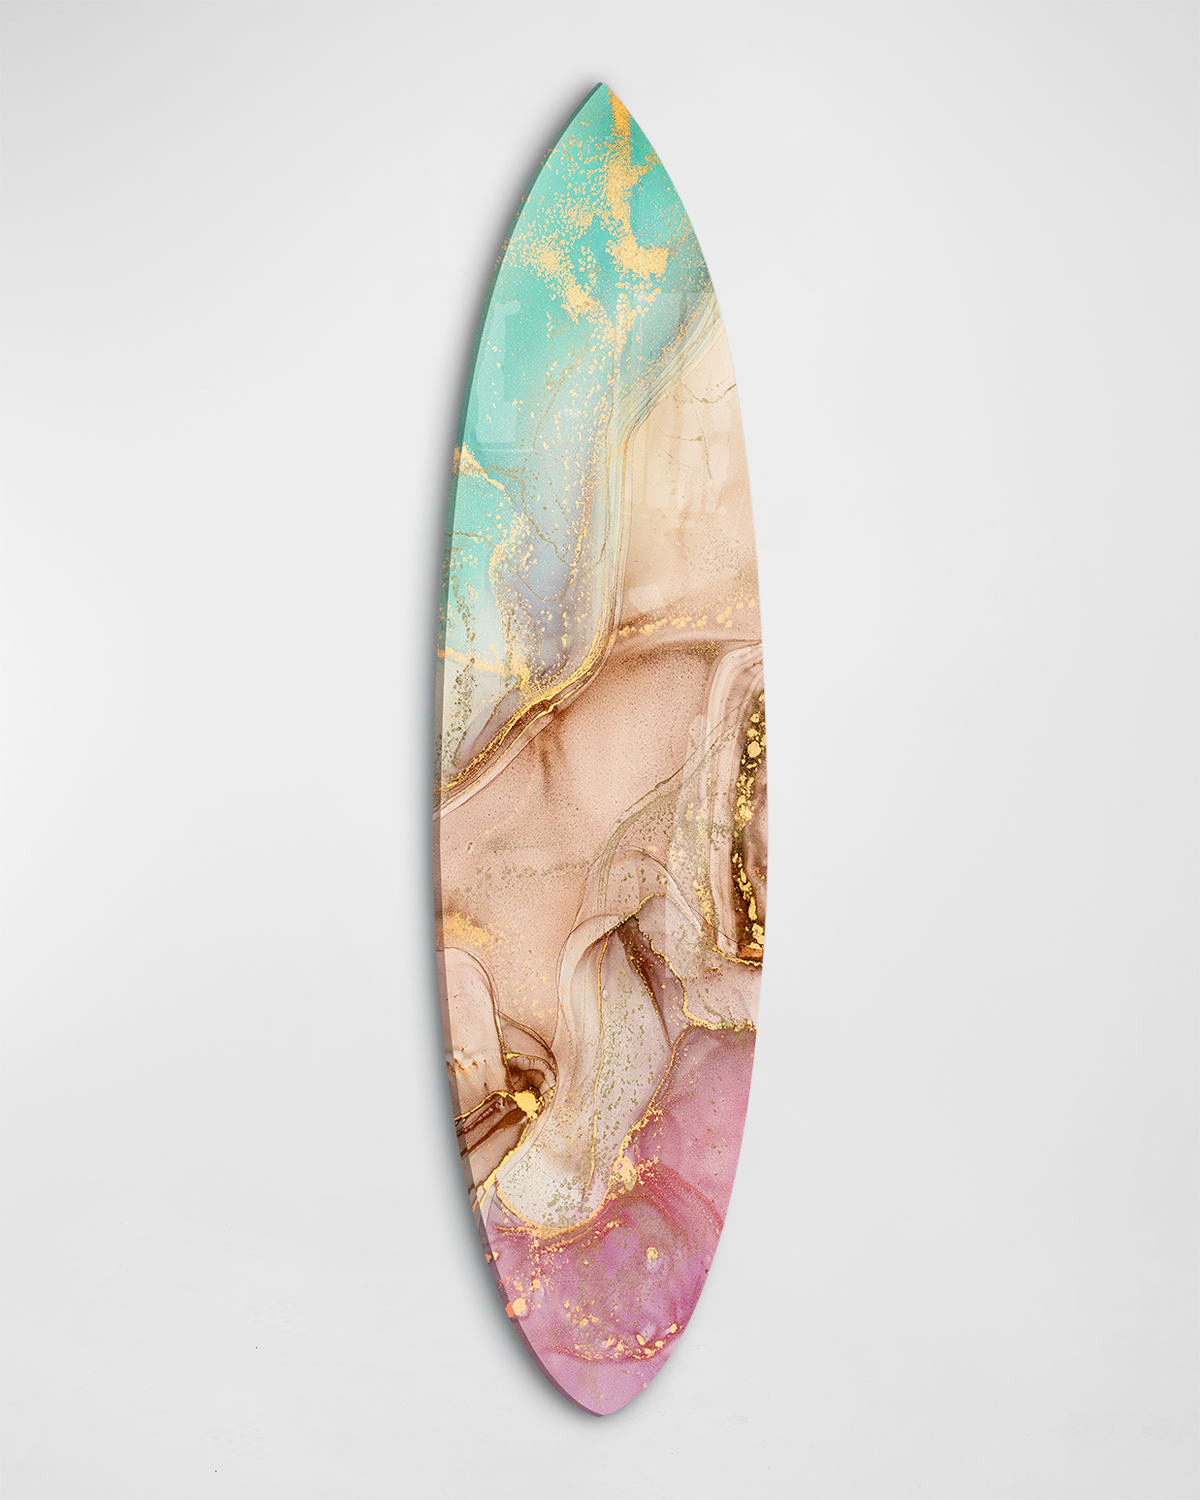 Shop The Oliver Gal Artist Co. Decorative Surfboard Art In Pink